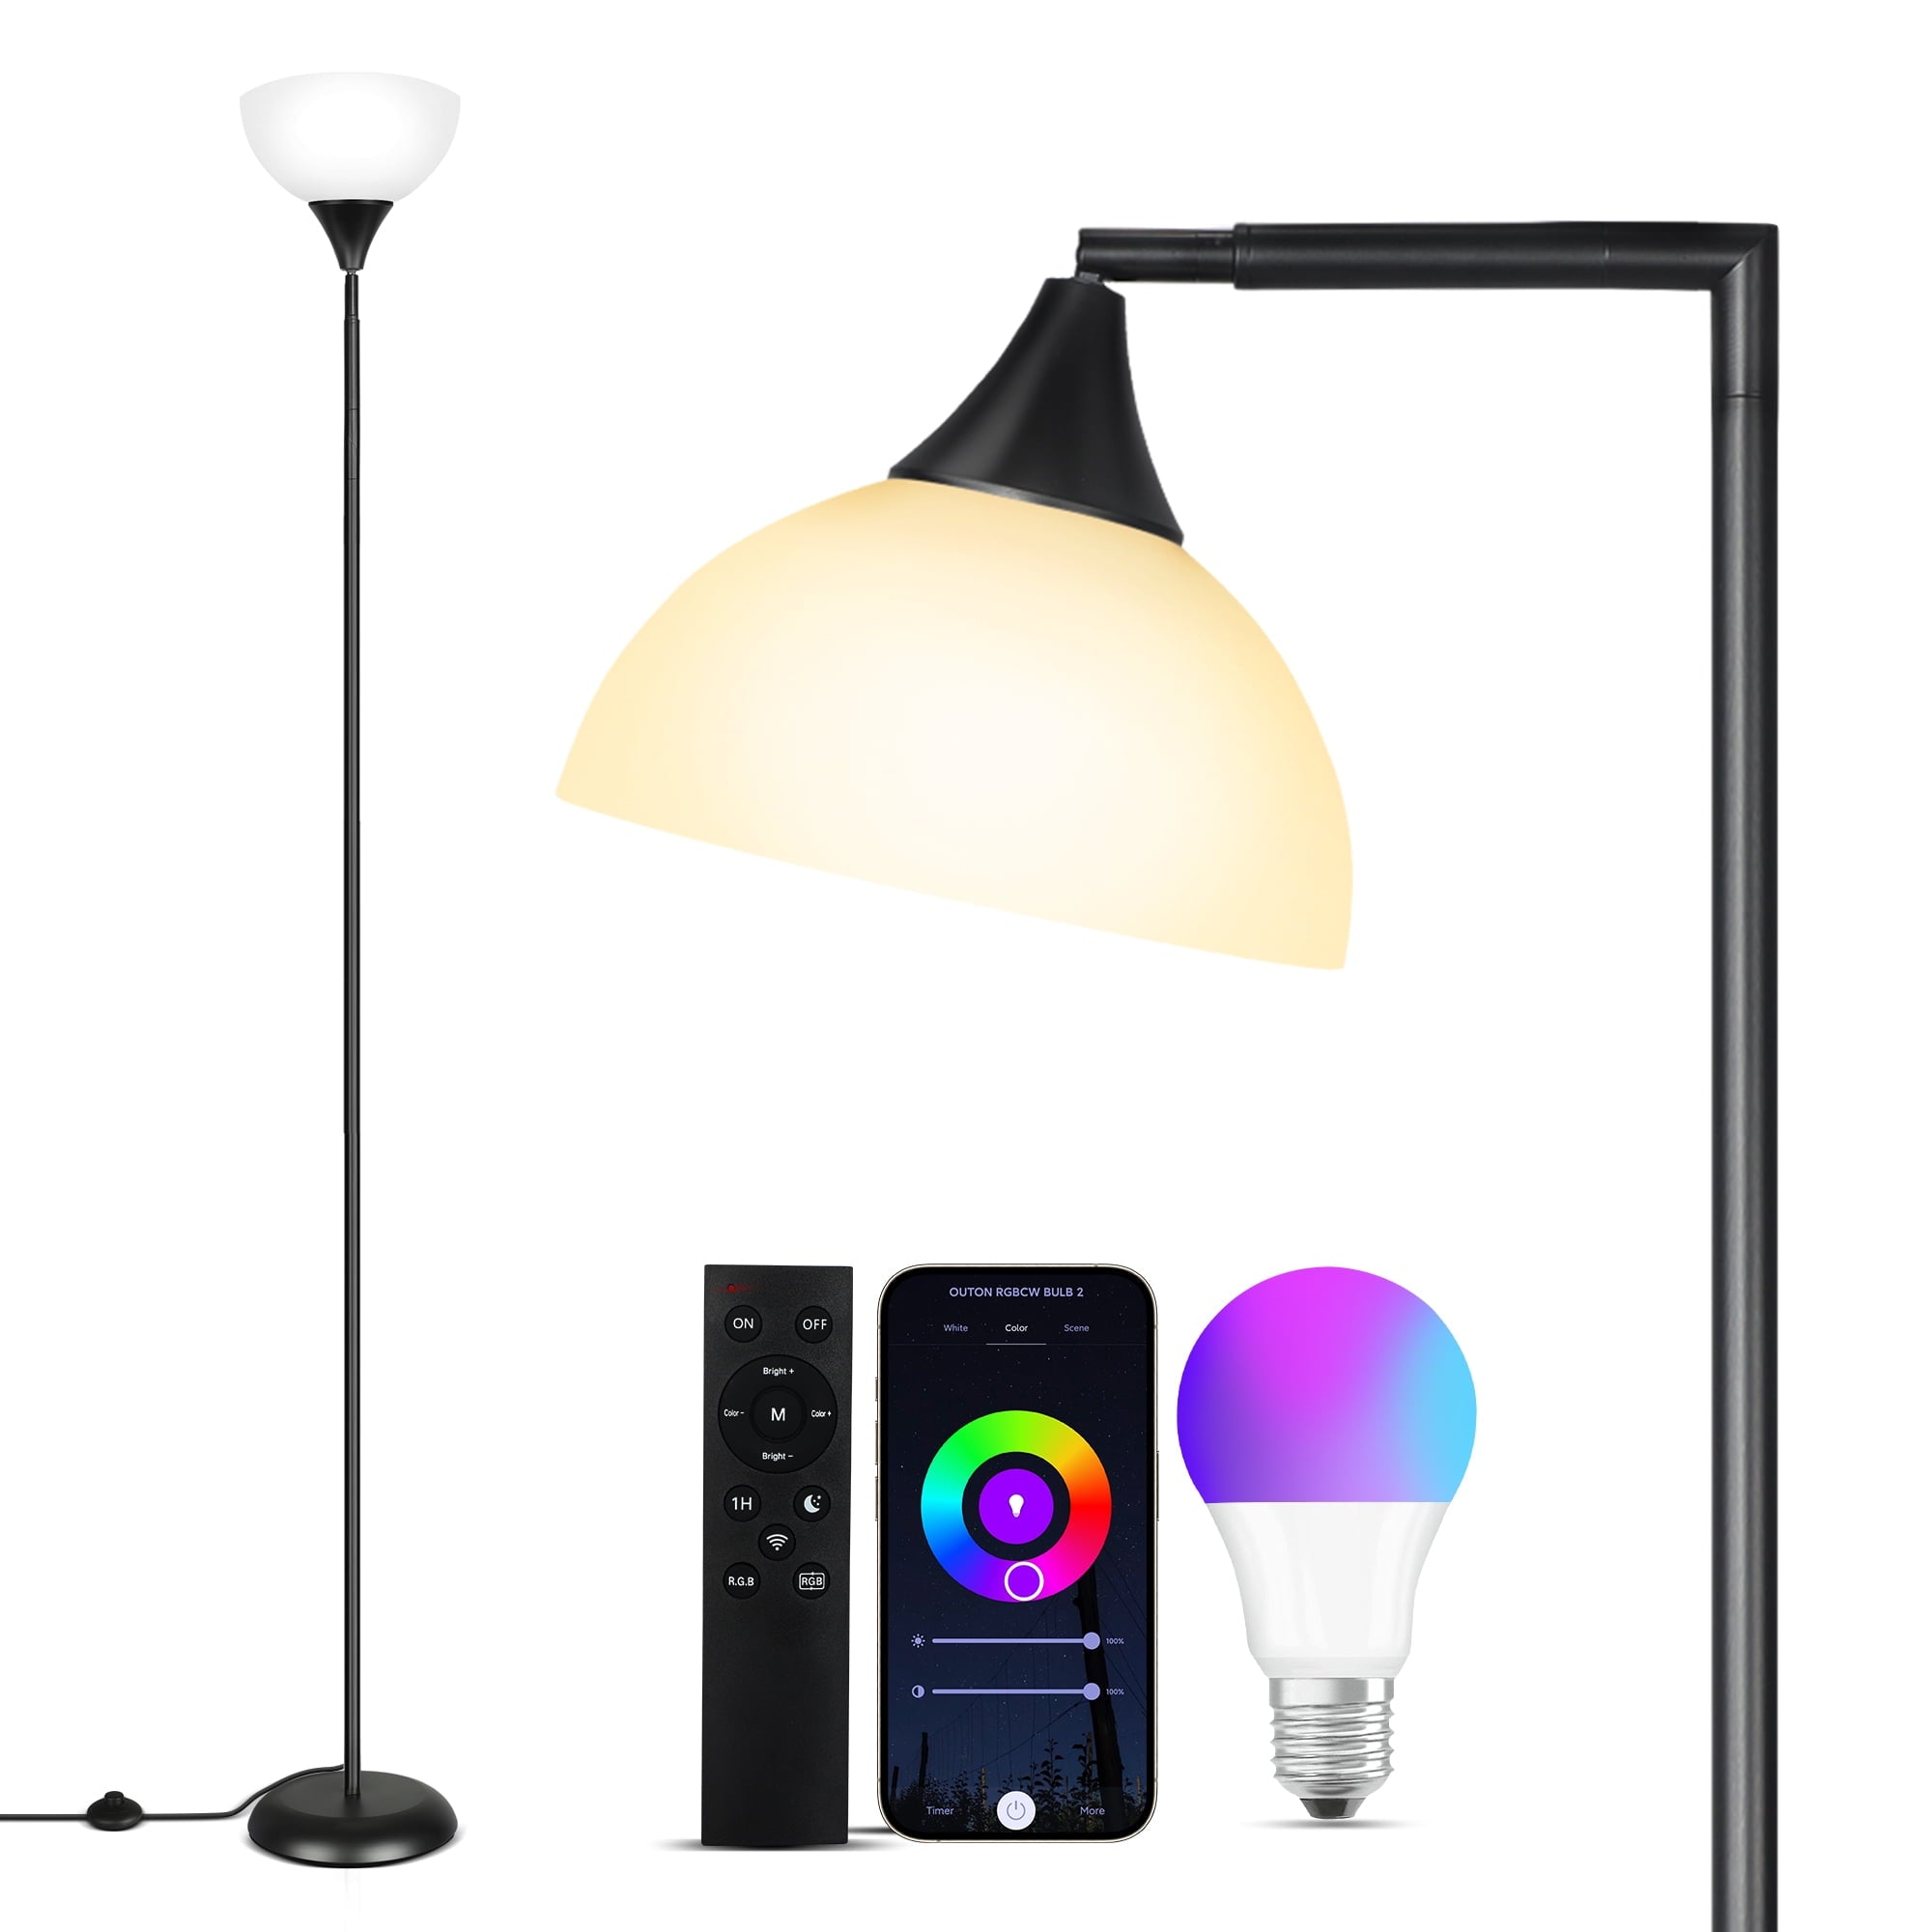 OUTON Smart Floor Lamp, RGB Adjustable Reading Light Compatible with Alexa & Google Home, Modern Tall Standing Lamp for Living Room, Bedroom, Black